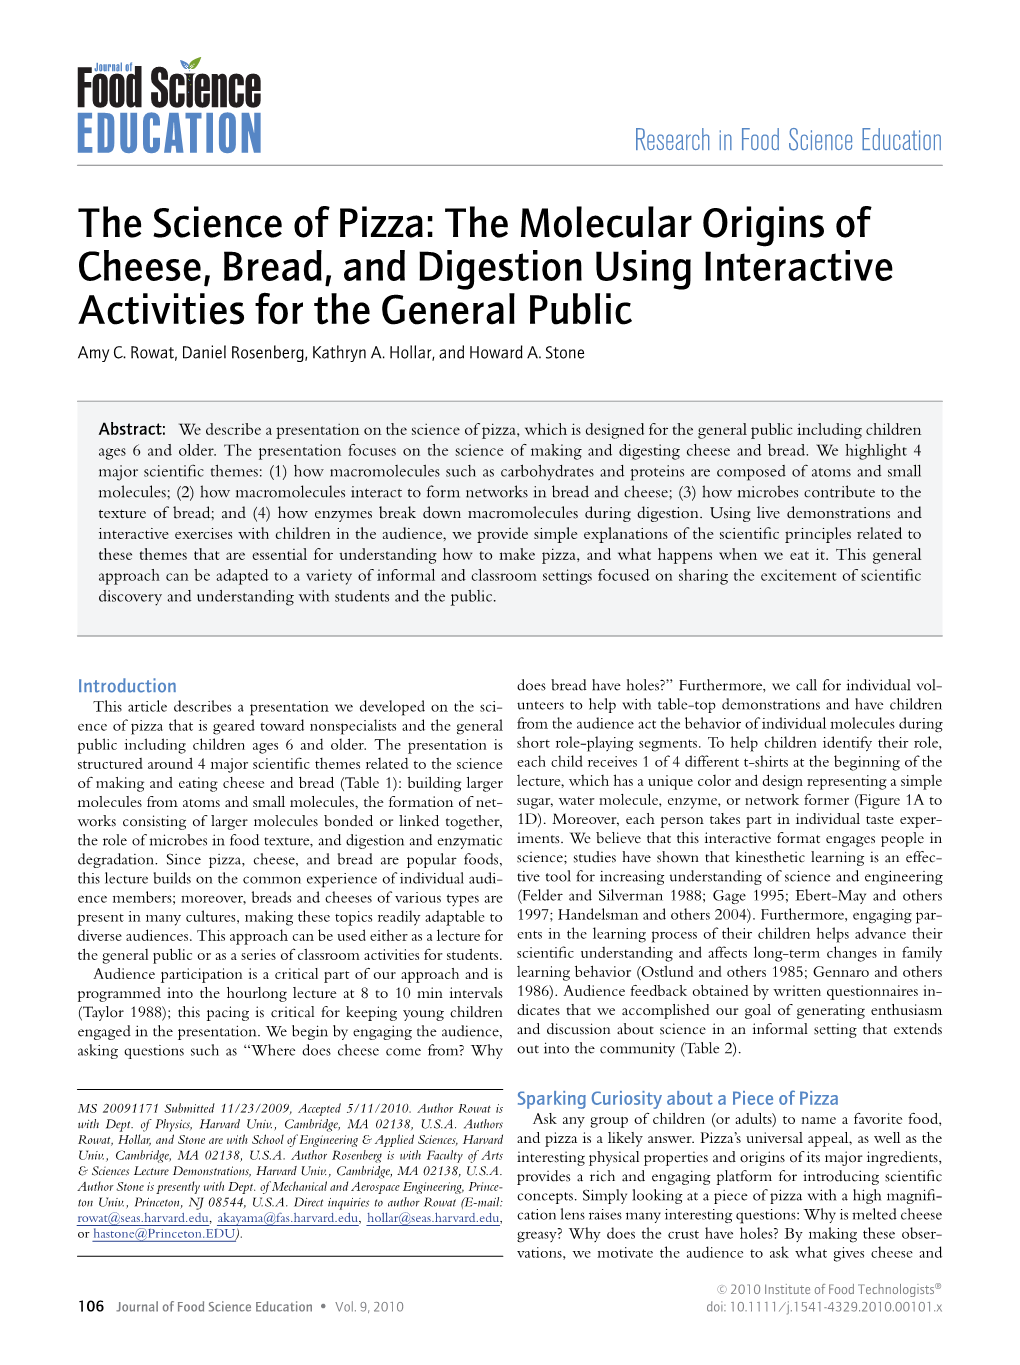 The Science of Pizza: the Molecular Origins of Cheese, Bread, and Digestion Using Interactive Activities for the General Public Amy C